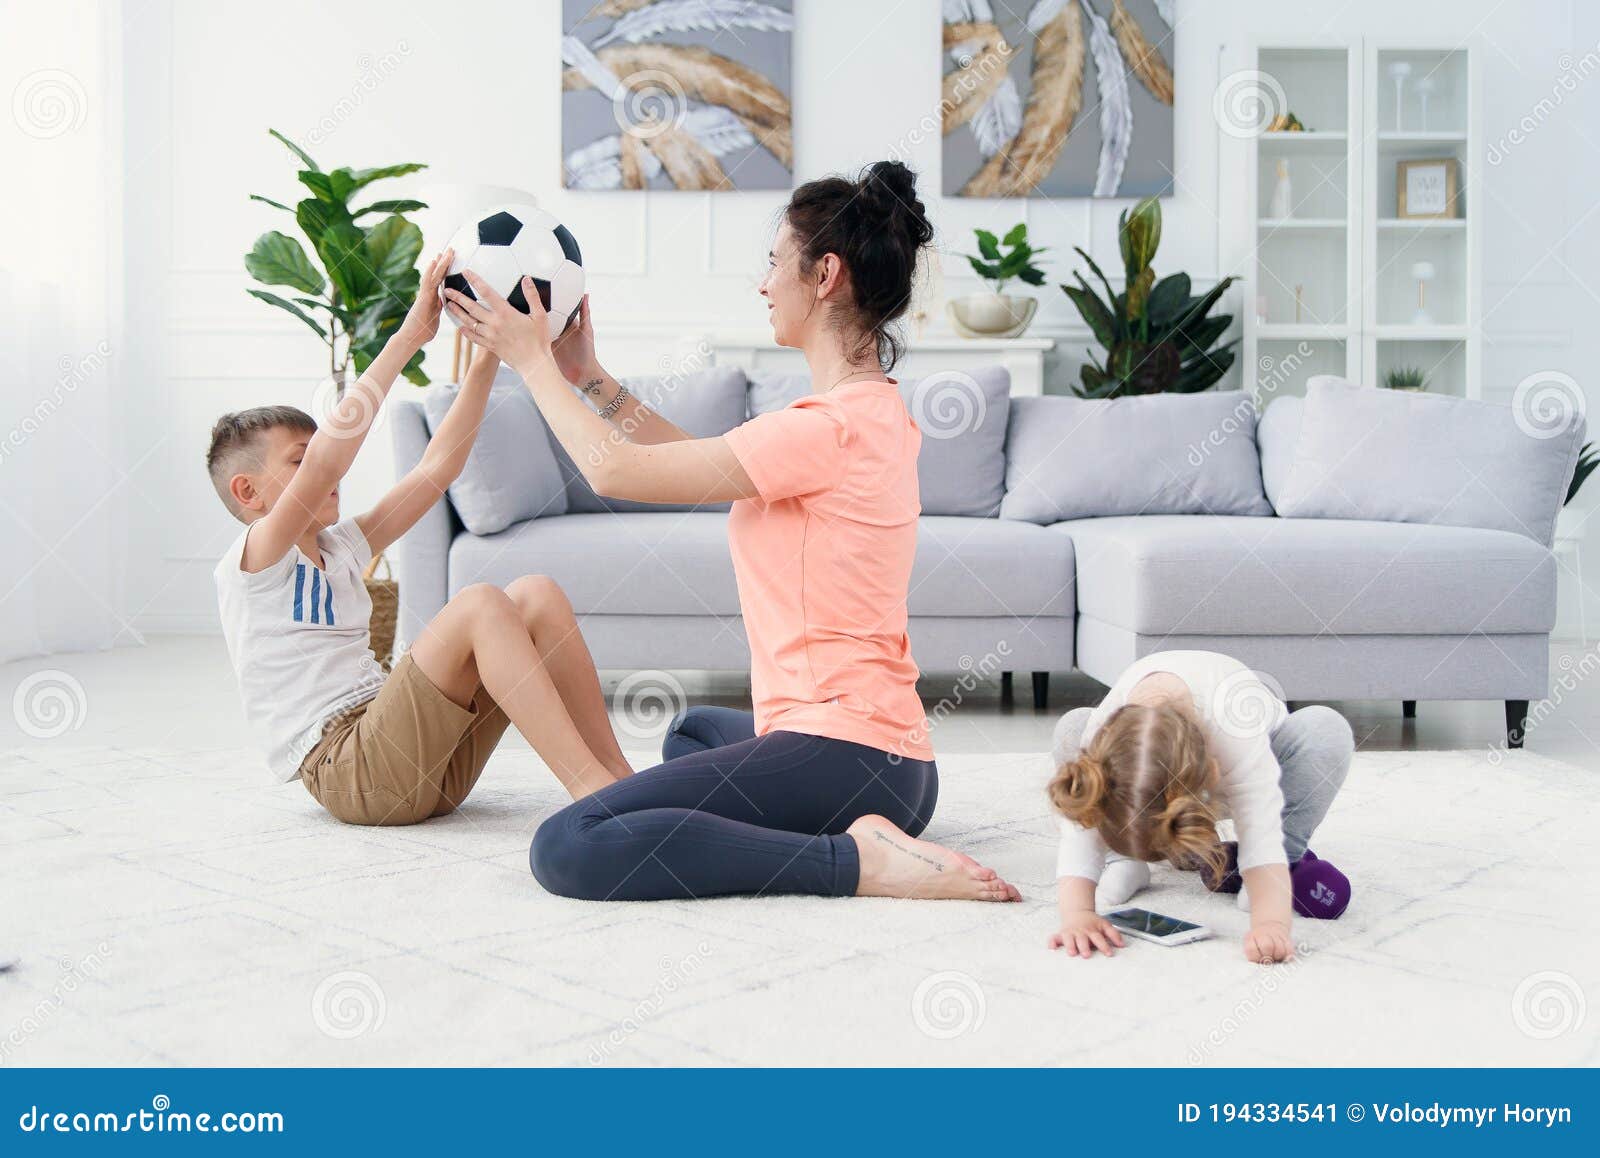 Young Sporty Mom With Son Doing Morning Work Out Exercises At Home Healthy Family Lifestyle Concept Stock Image Image Of Relaxing Exercise